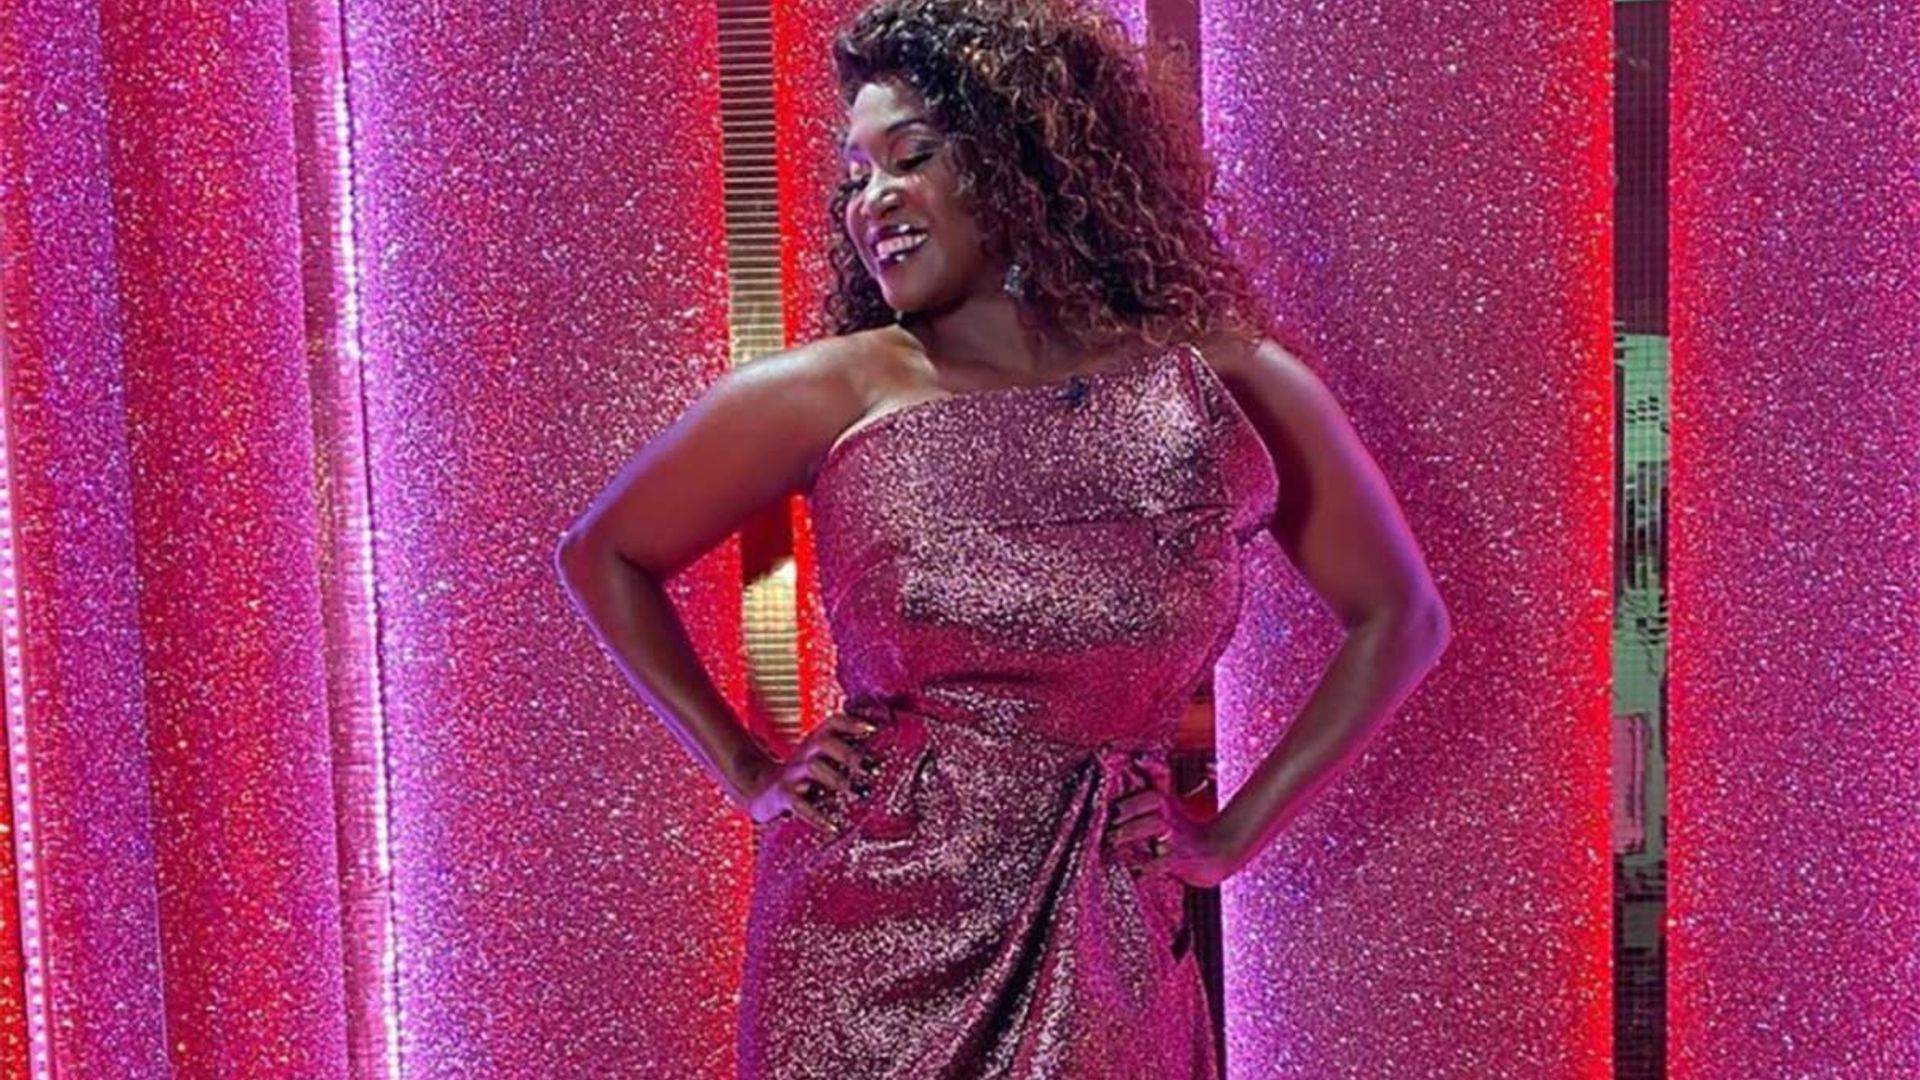 Motsi Mabuse dazzles on Strictly with rose gold dress and gorgeous curls